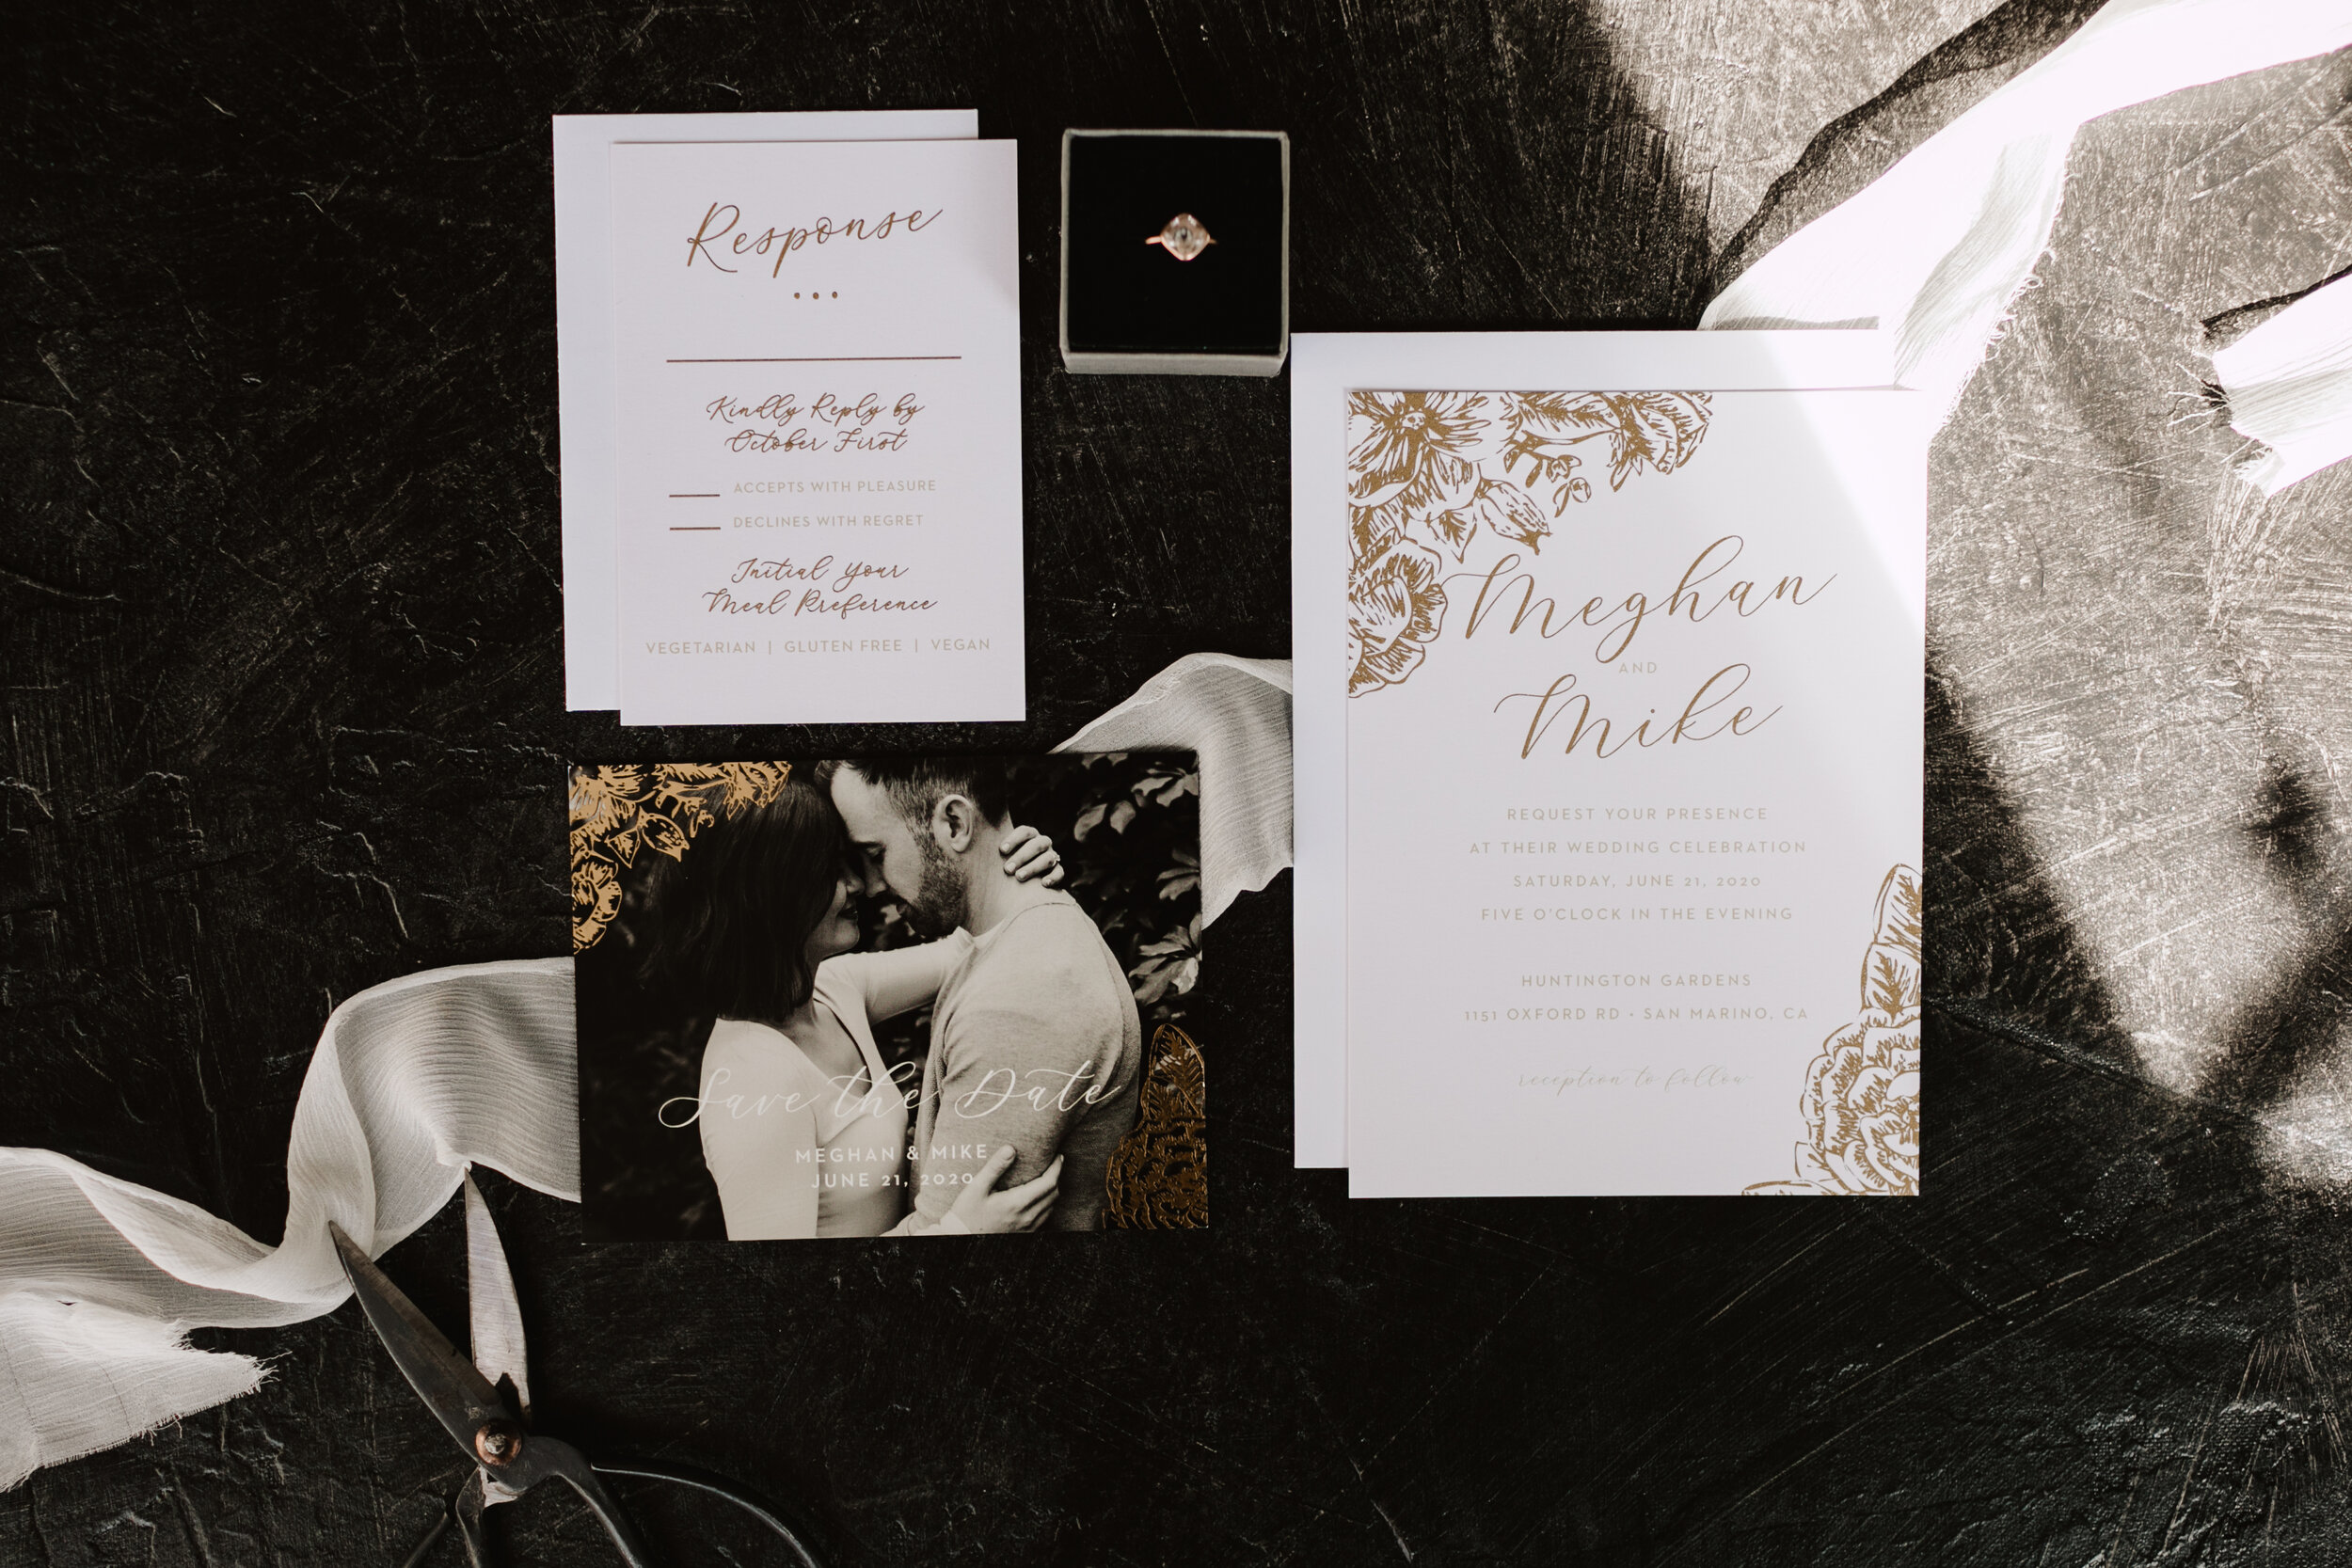 Basic Invite, Wedding Invitations, Save the Dates, Save the Date Maganets, Emily Wehner Photography-1.jpg